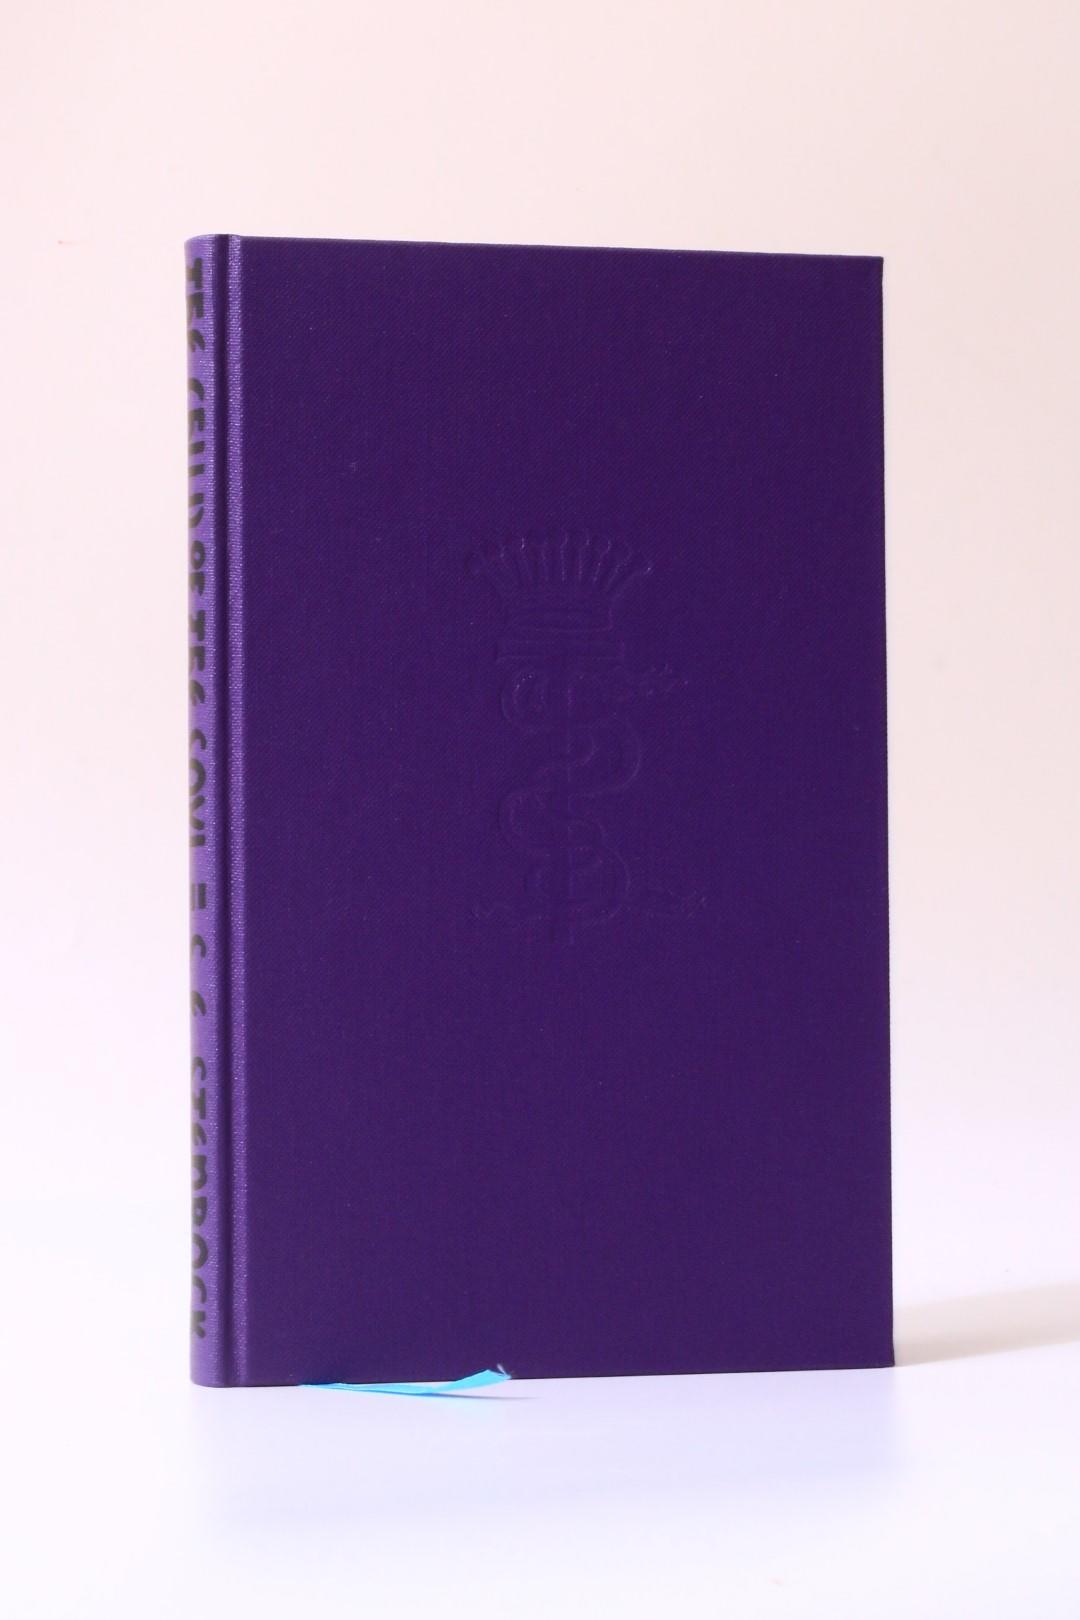 Stanislaus Eric [Count] Stenbock - The Child of the Soul and Other Stories - Durtro Press, 1999, Limited Edition.